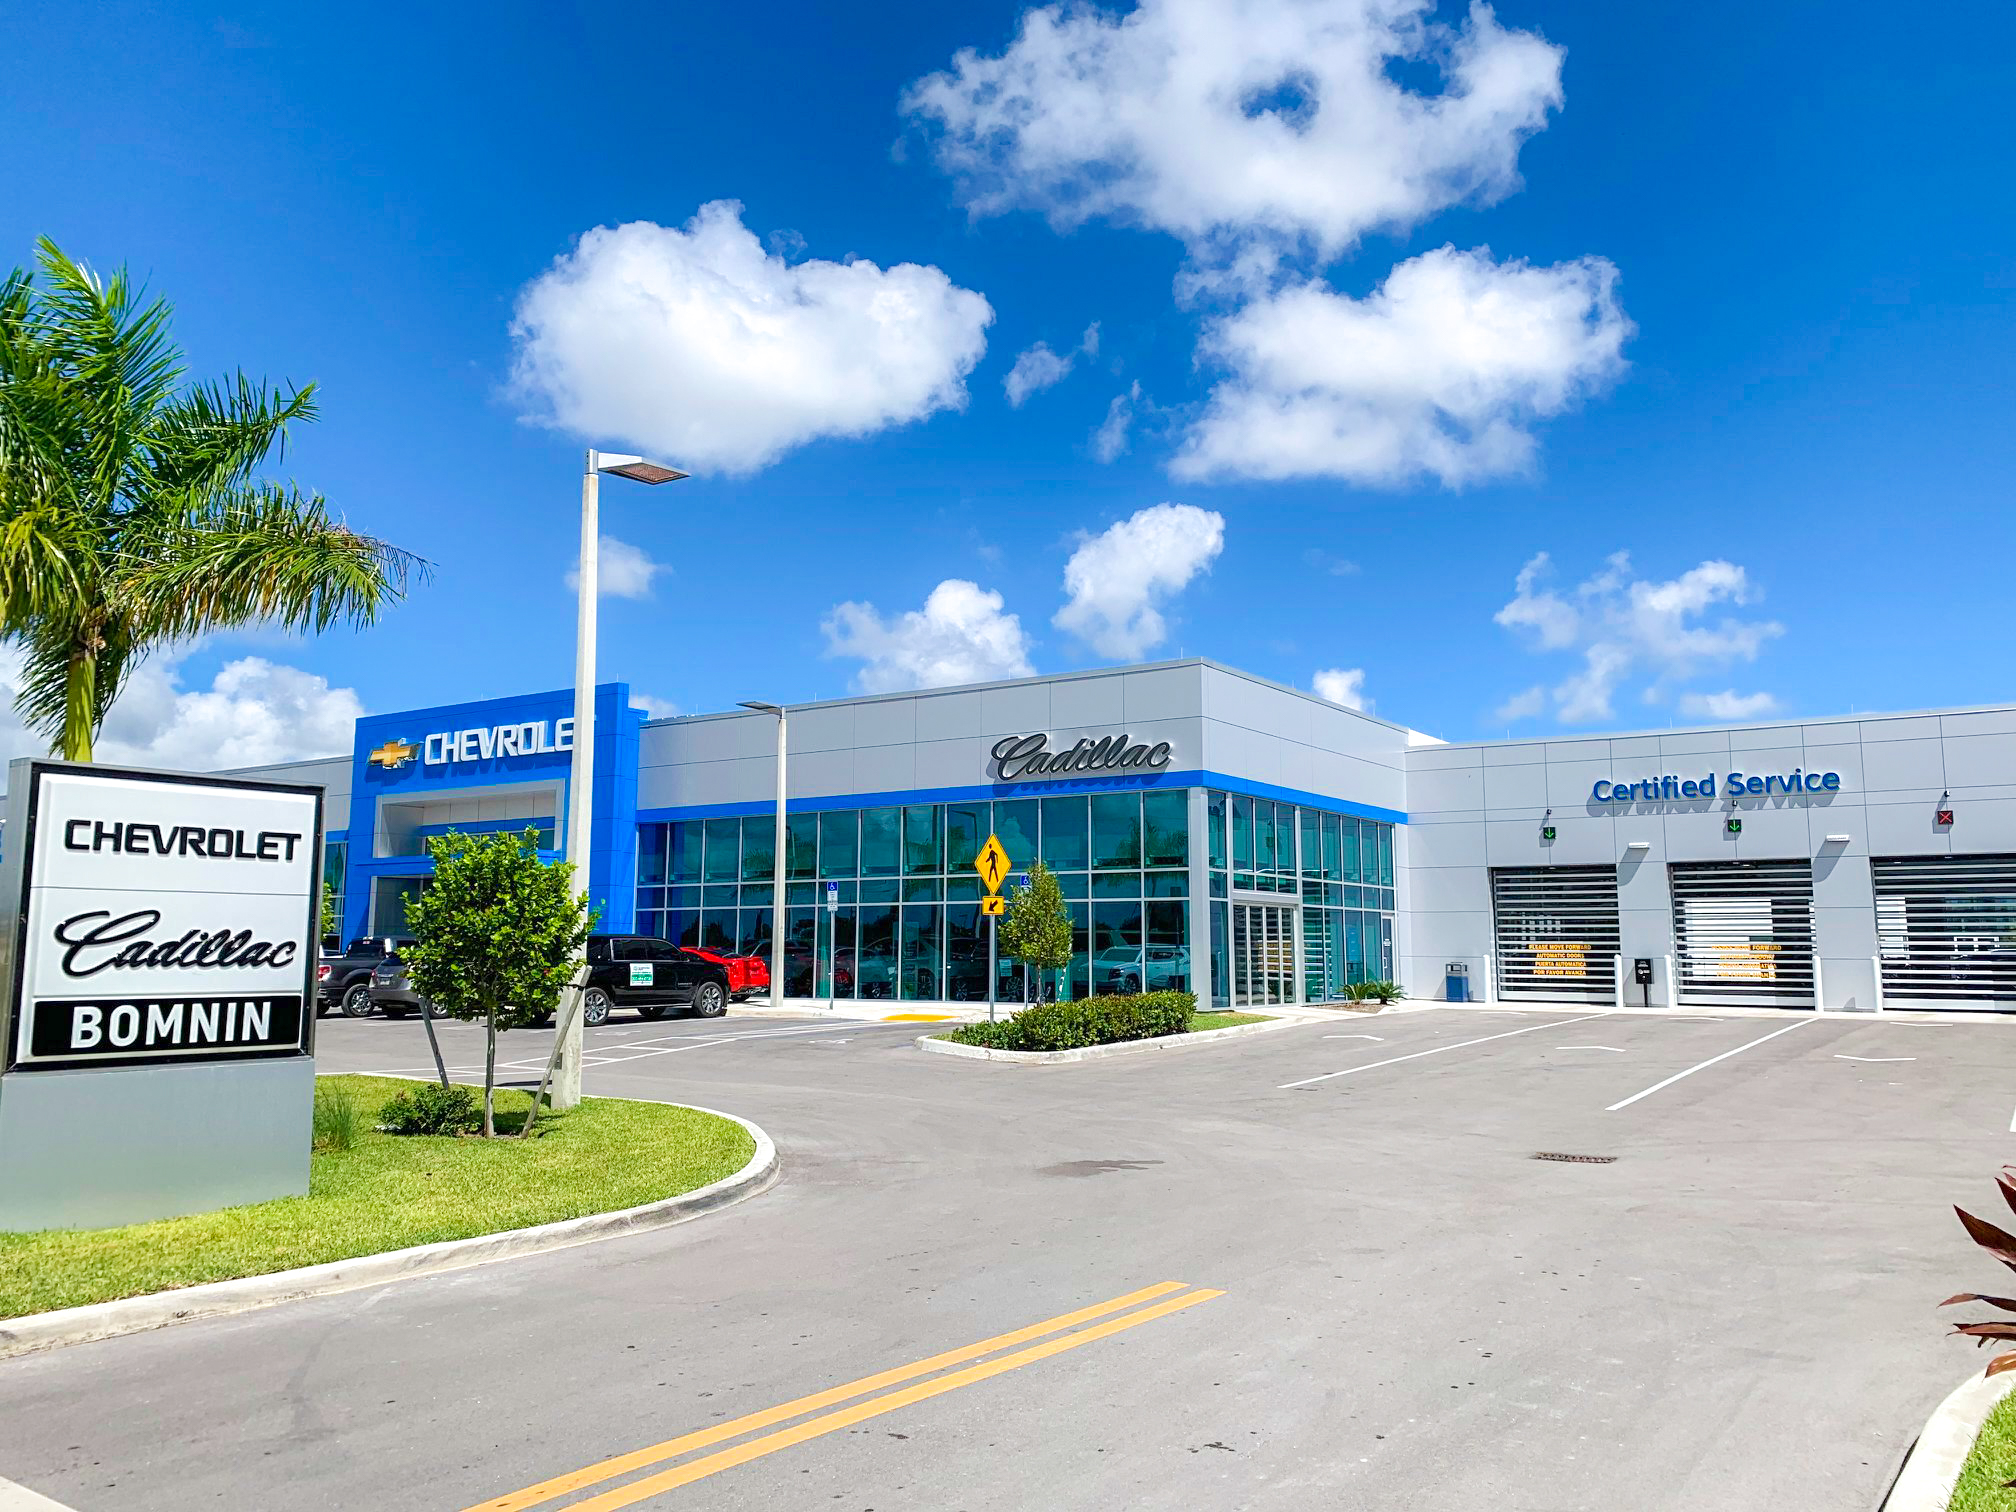 Bomnin Chevrolet Donates New Car, $250k to Charitable Causes During Homestead Dealership Opening